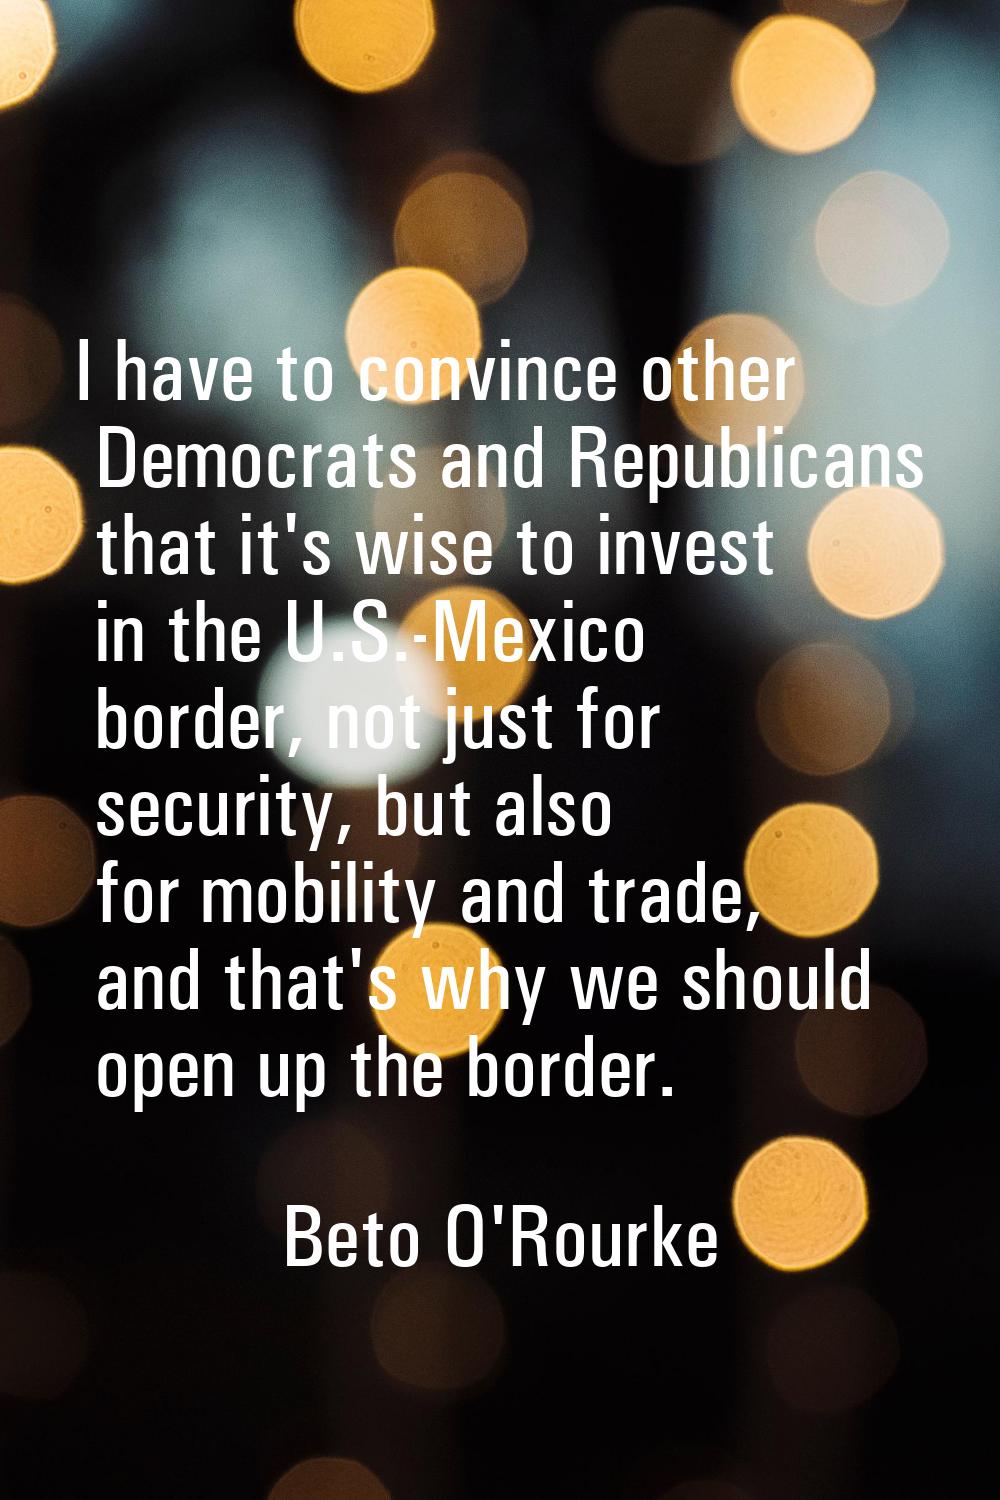 I have to convince other Democrats and Republicans that it's wise to invest in the U.S.-Mexico bord